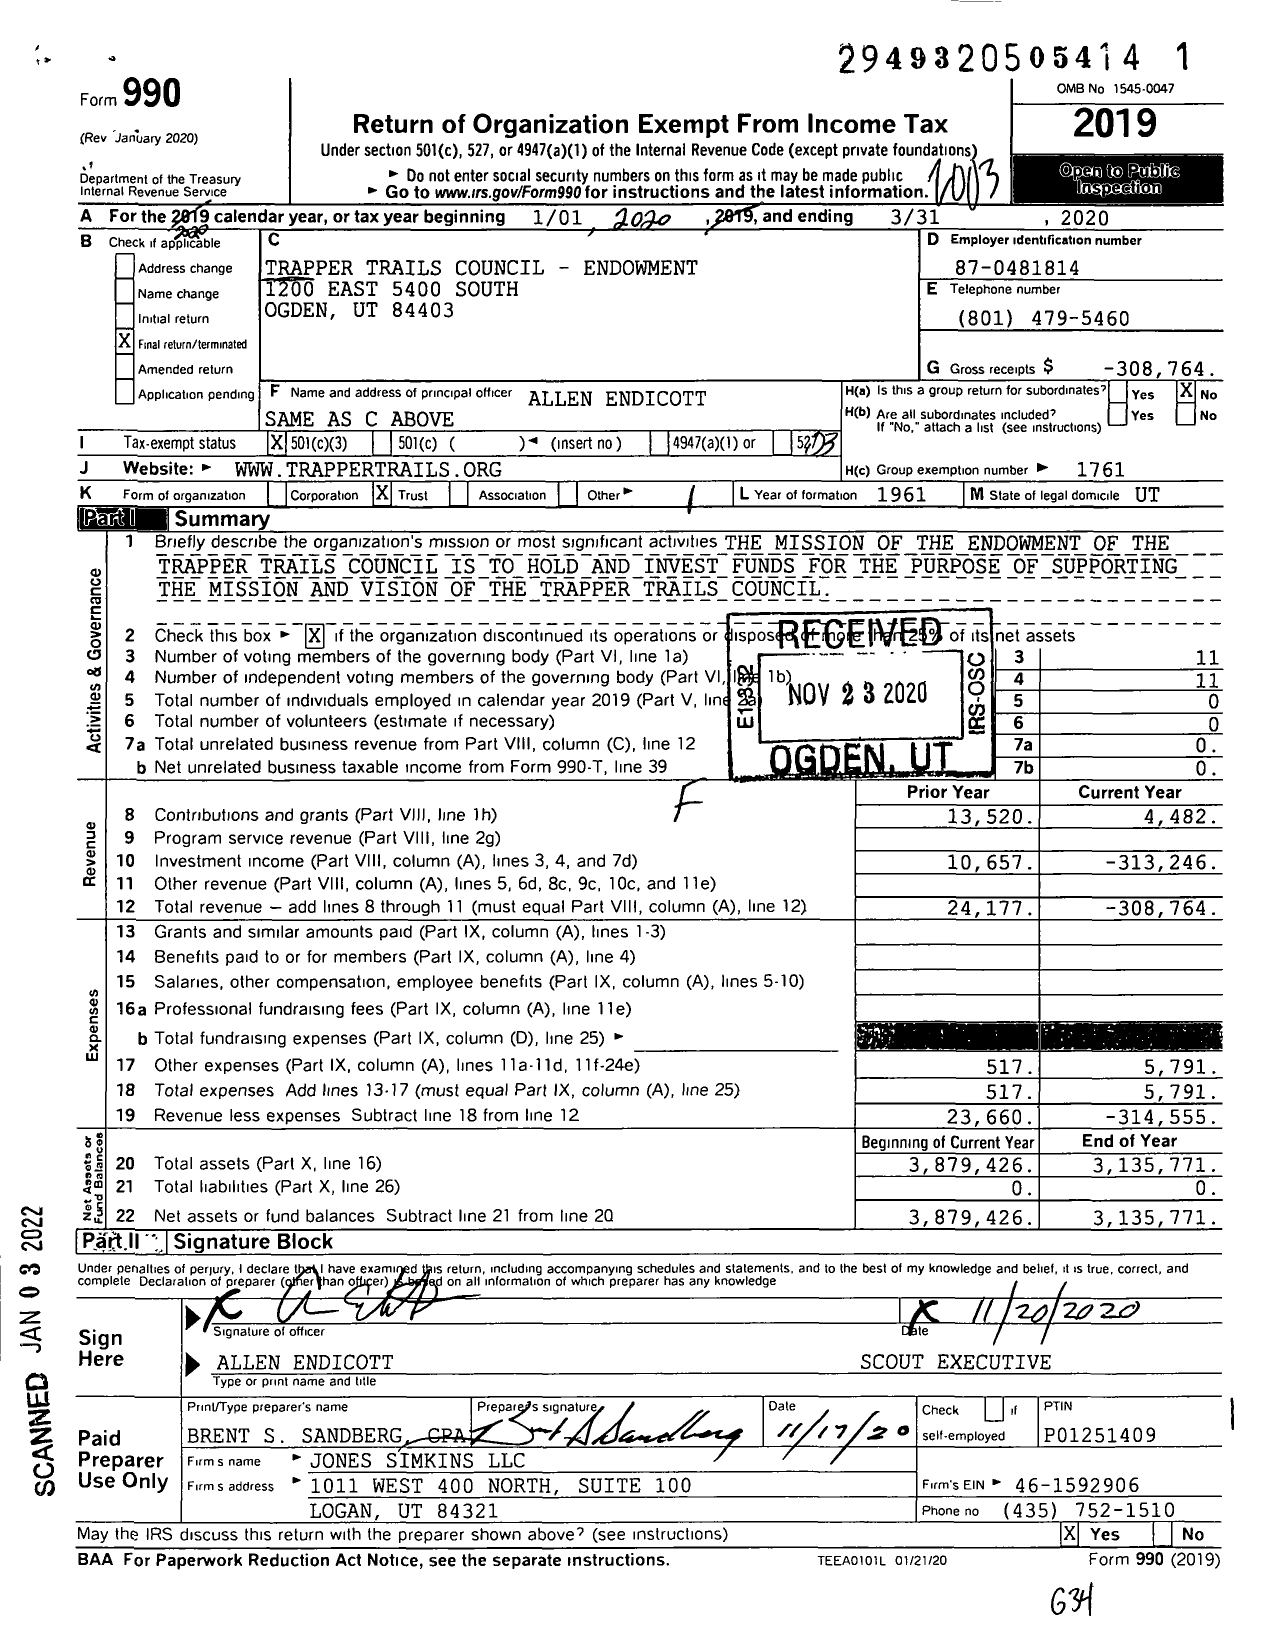 Image of first page of 2019 Form 990 for Boy Scouts of America - 589 Trapper Trails Council Endmt T